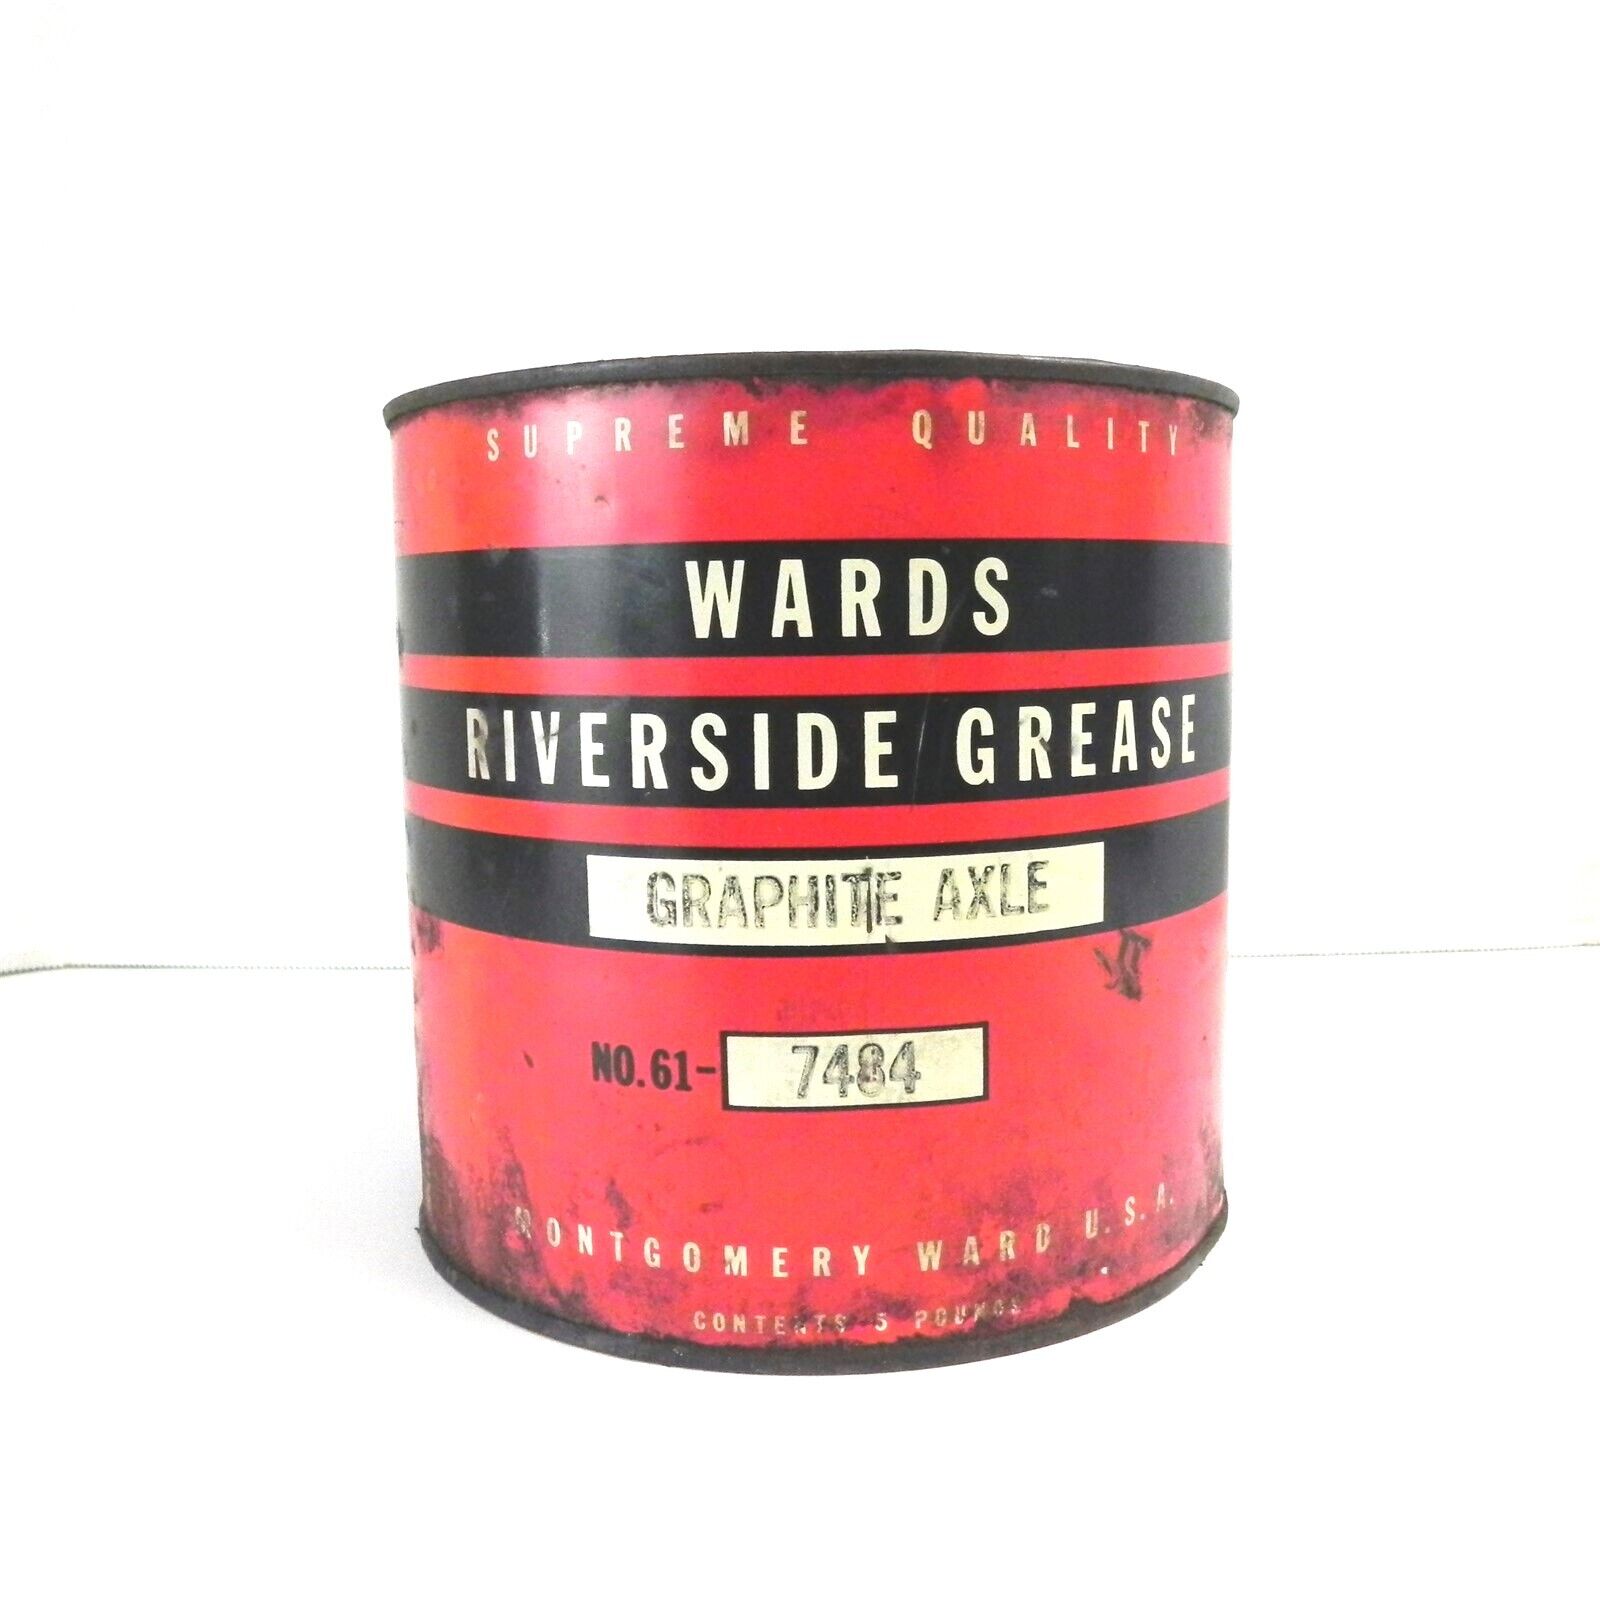 VINTAGE WARD\'S RIVERSIDE GREASE GRAPHITE AXLE 5 POUND CAN ALMOST FULL USED VTG